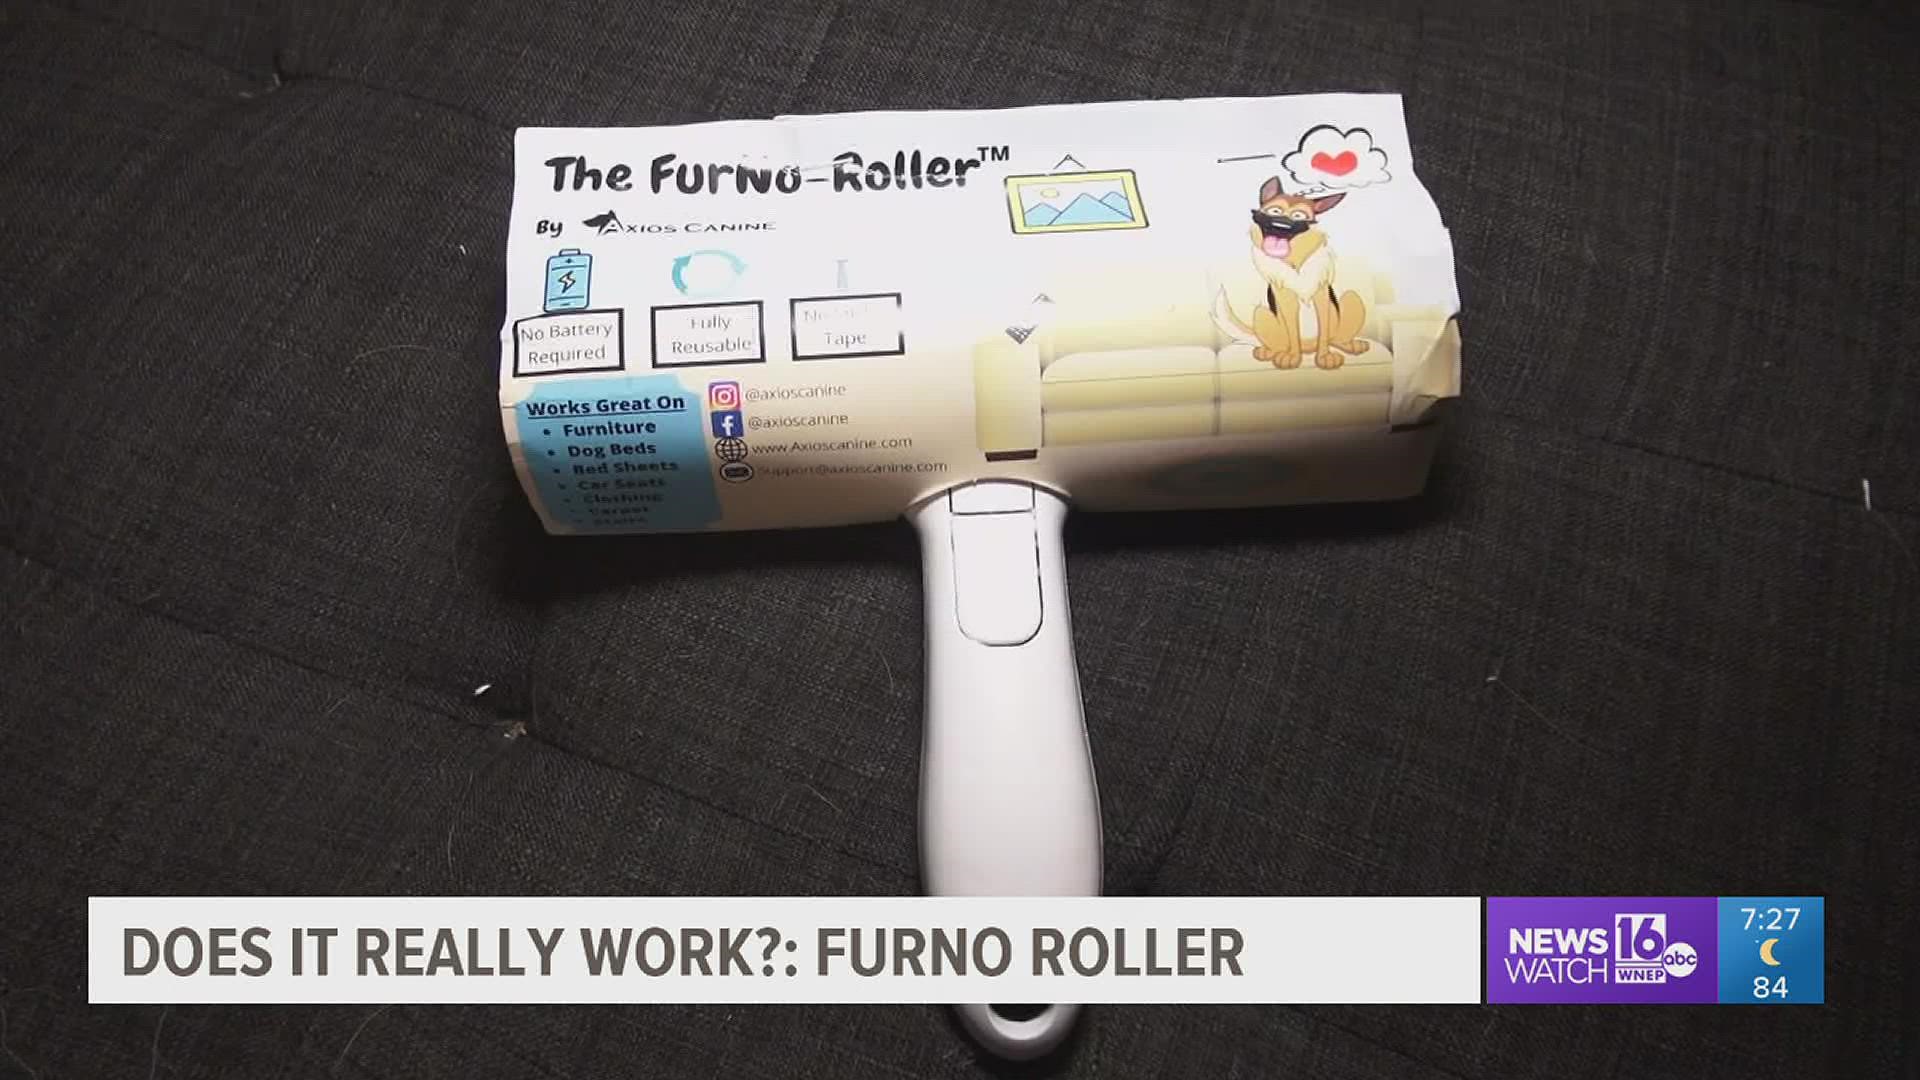 Simply roll it back and forth and the mess is gone. The maker claims, it will clean up your pet's furry mess in seconds.